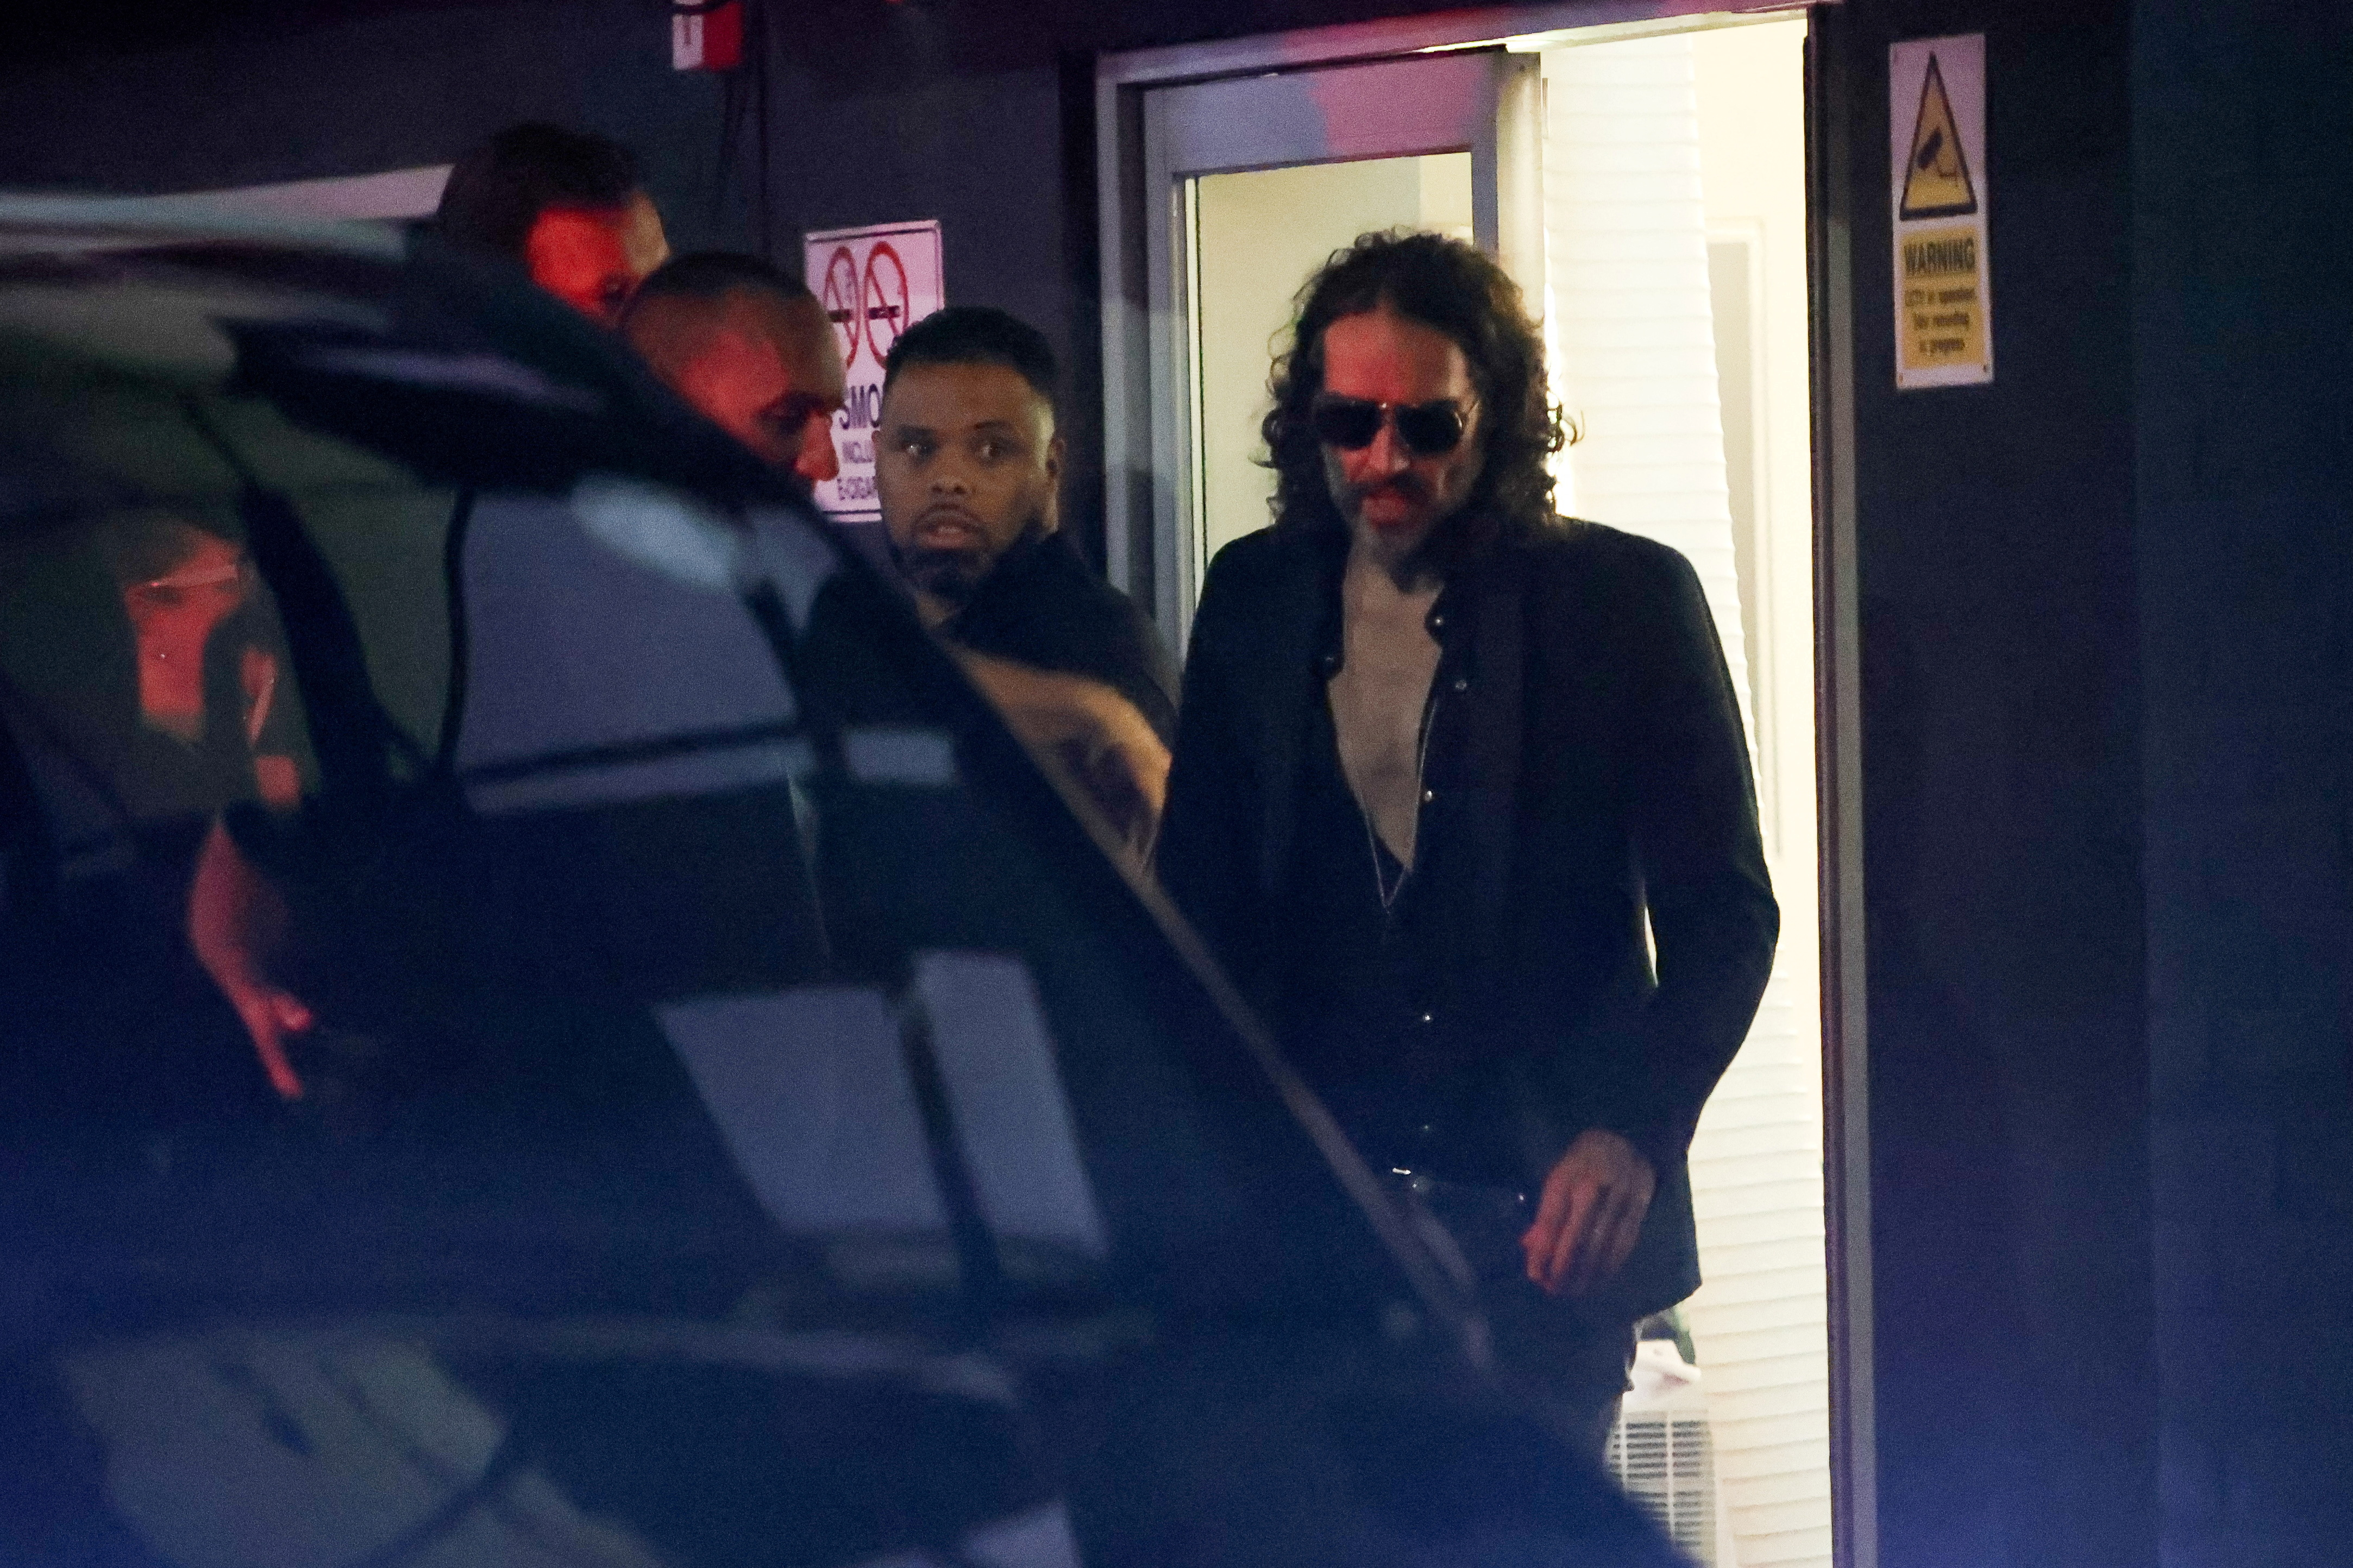 UK comedian Russell Brand denies media allegations of sex assaults Reuters image pic